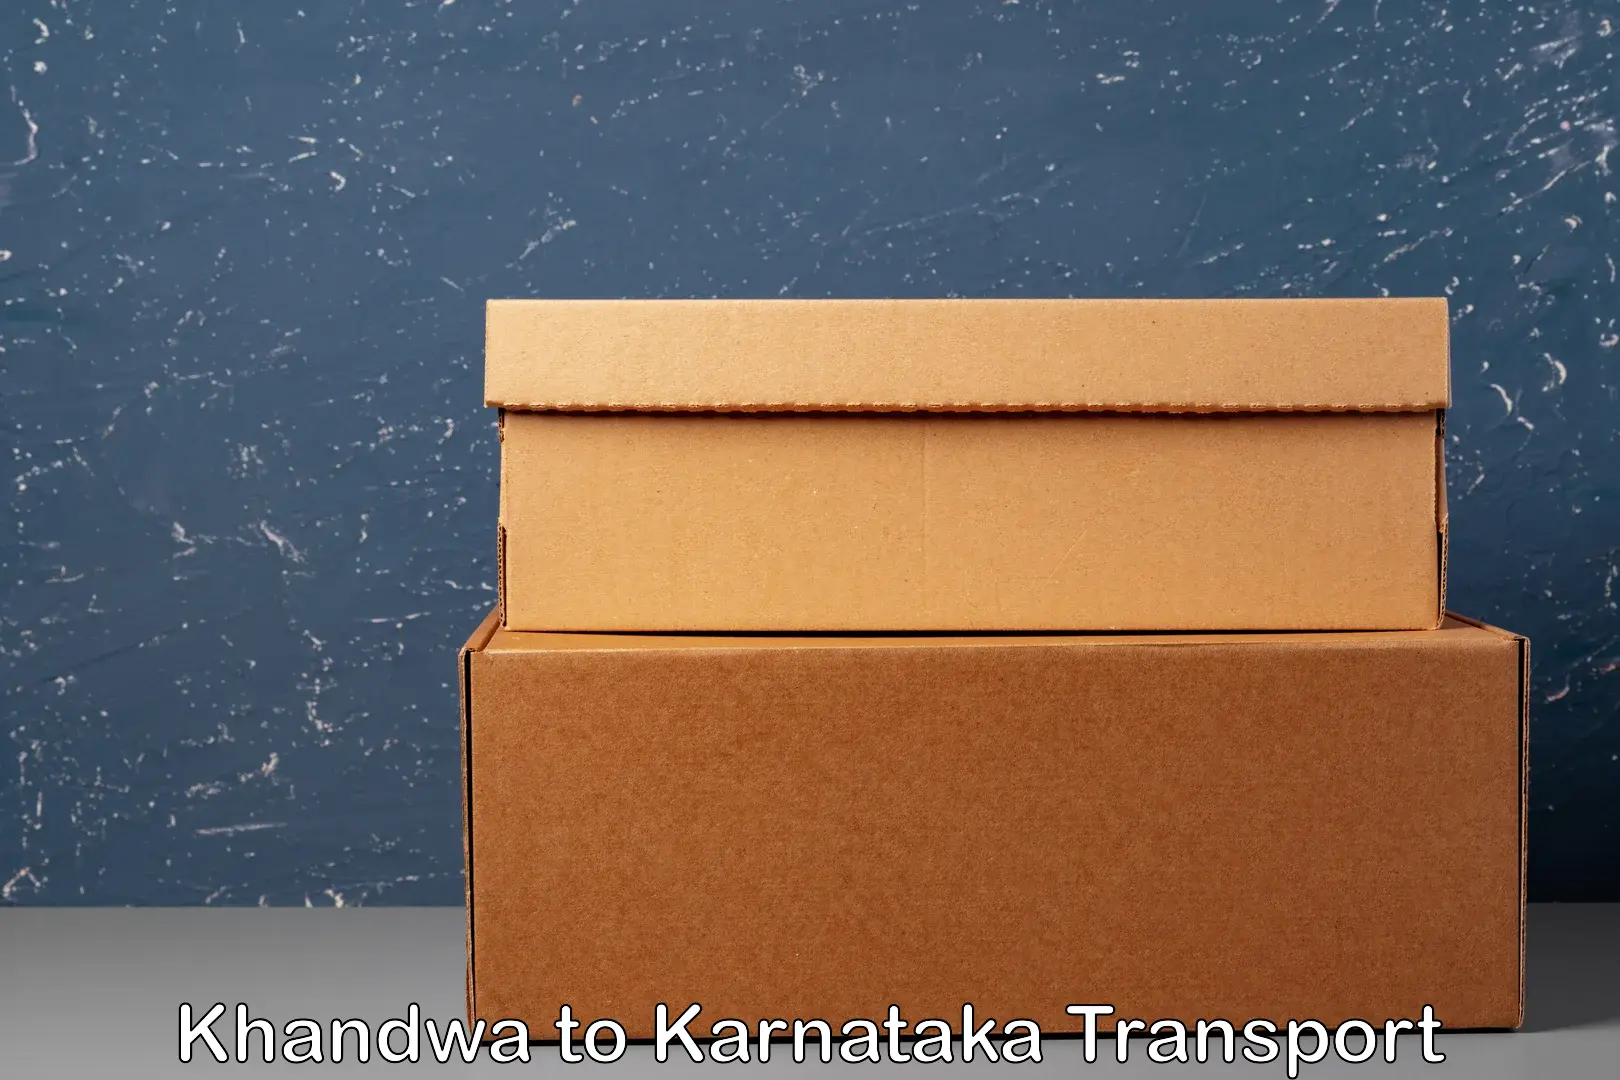 Package delivery services Khandwa to Mundgod